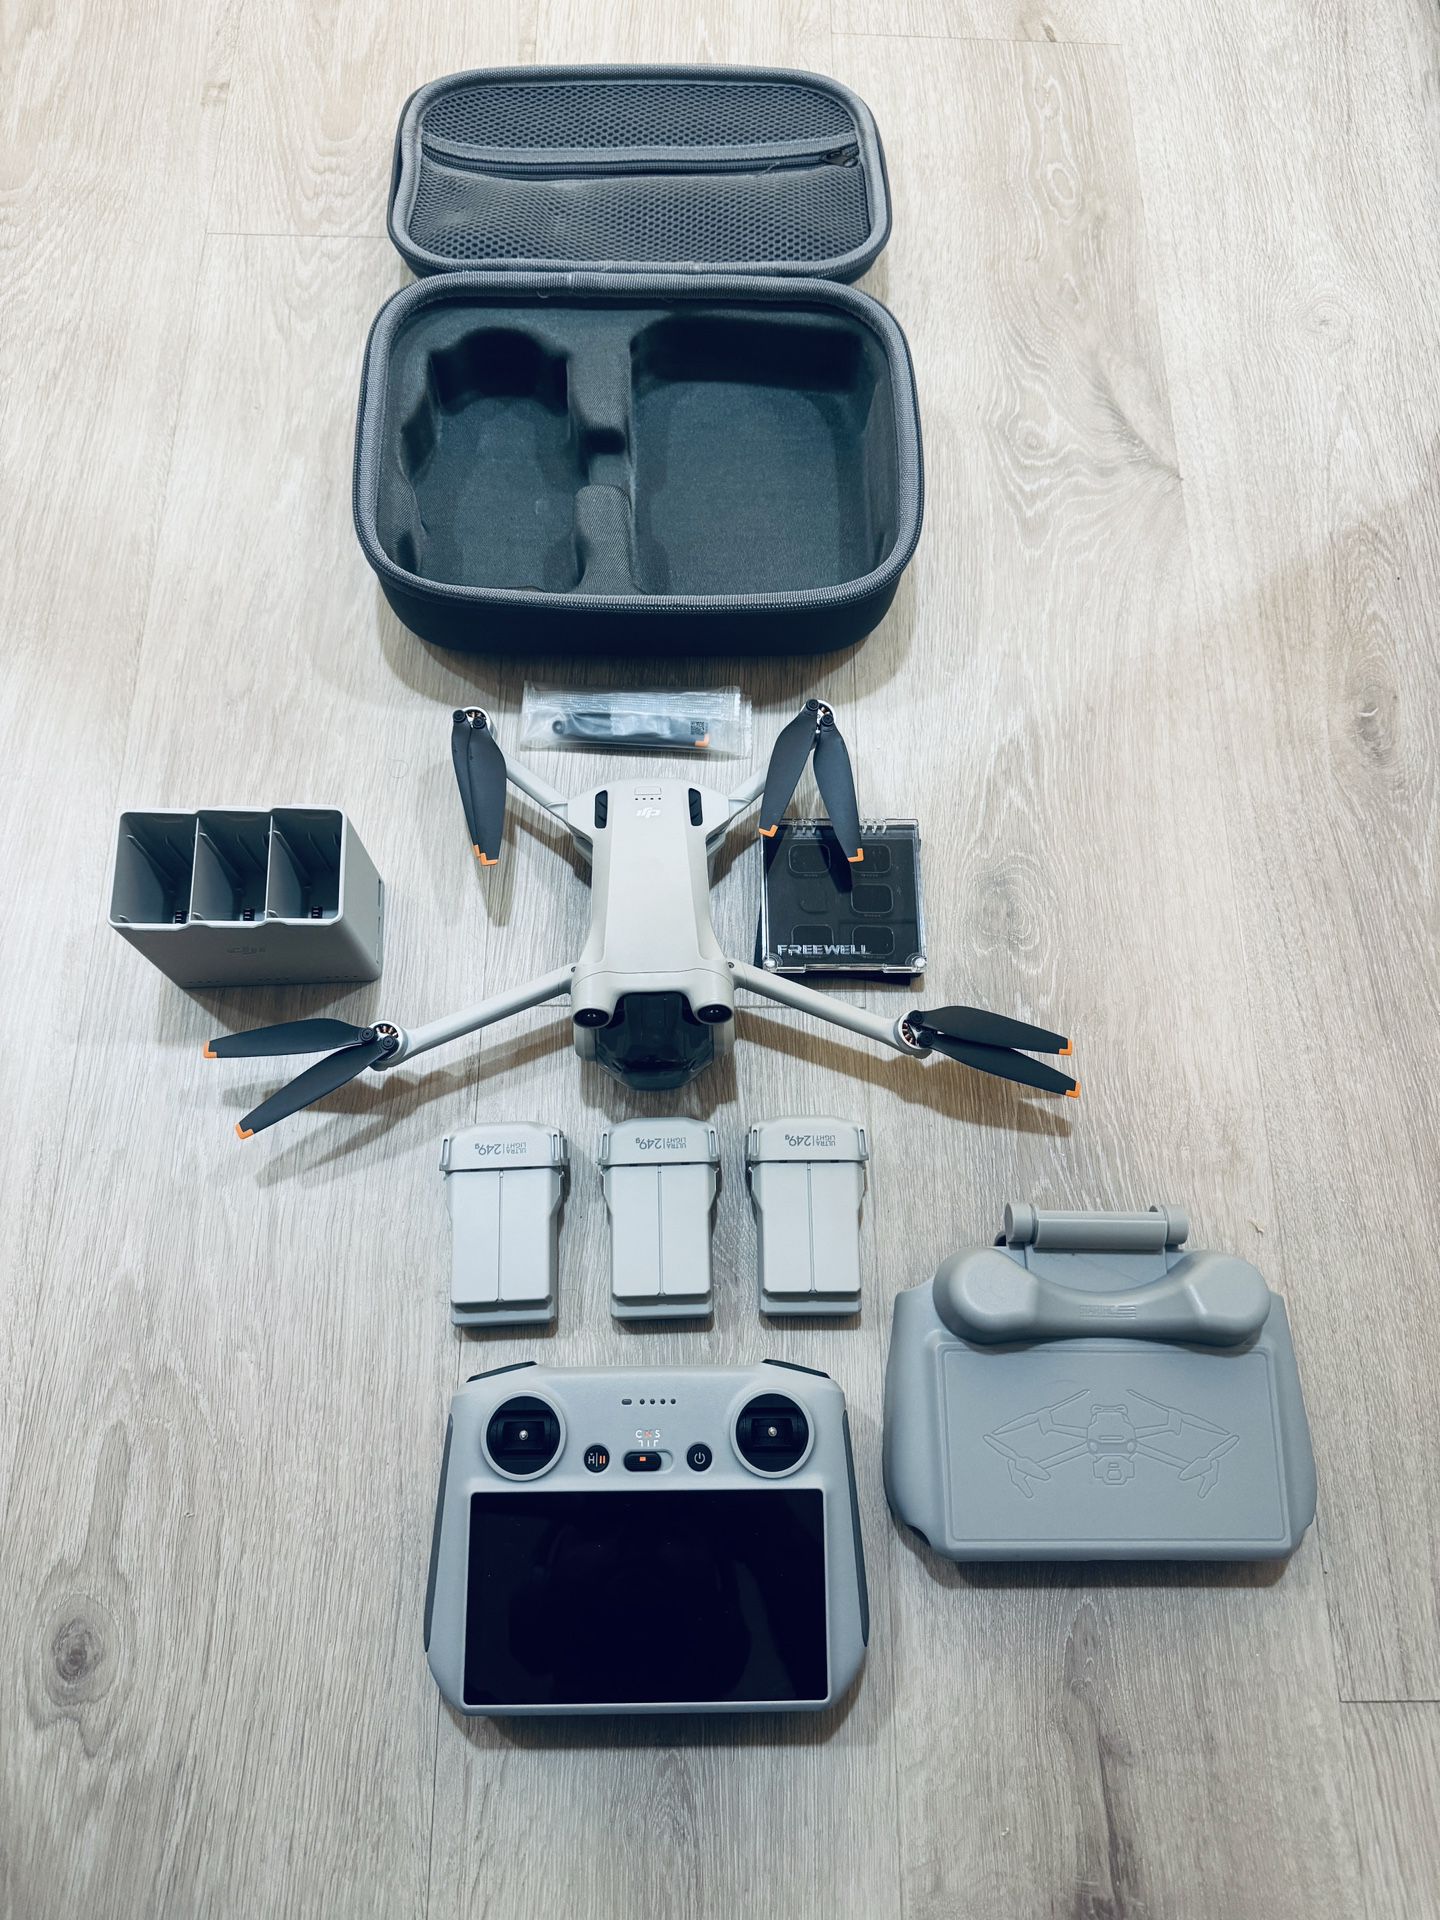 DJI Mini 3 Pro Drone With Fly More Kit, Extras, And DJI Care Refresh